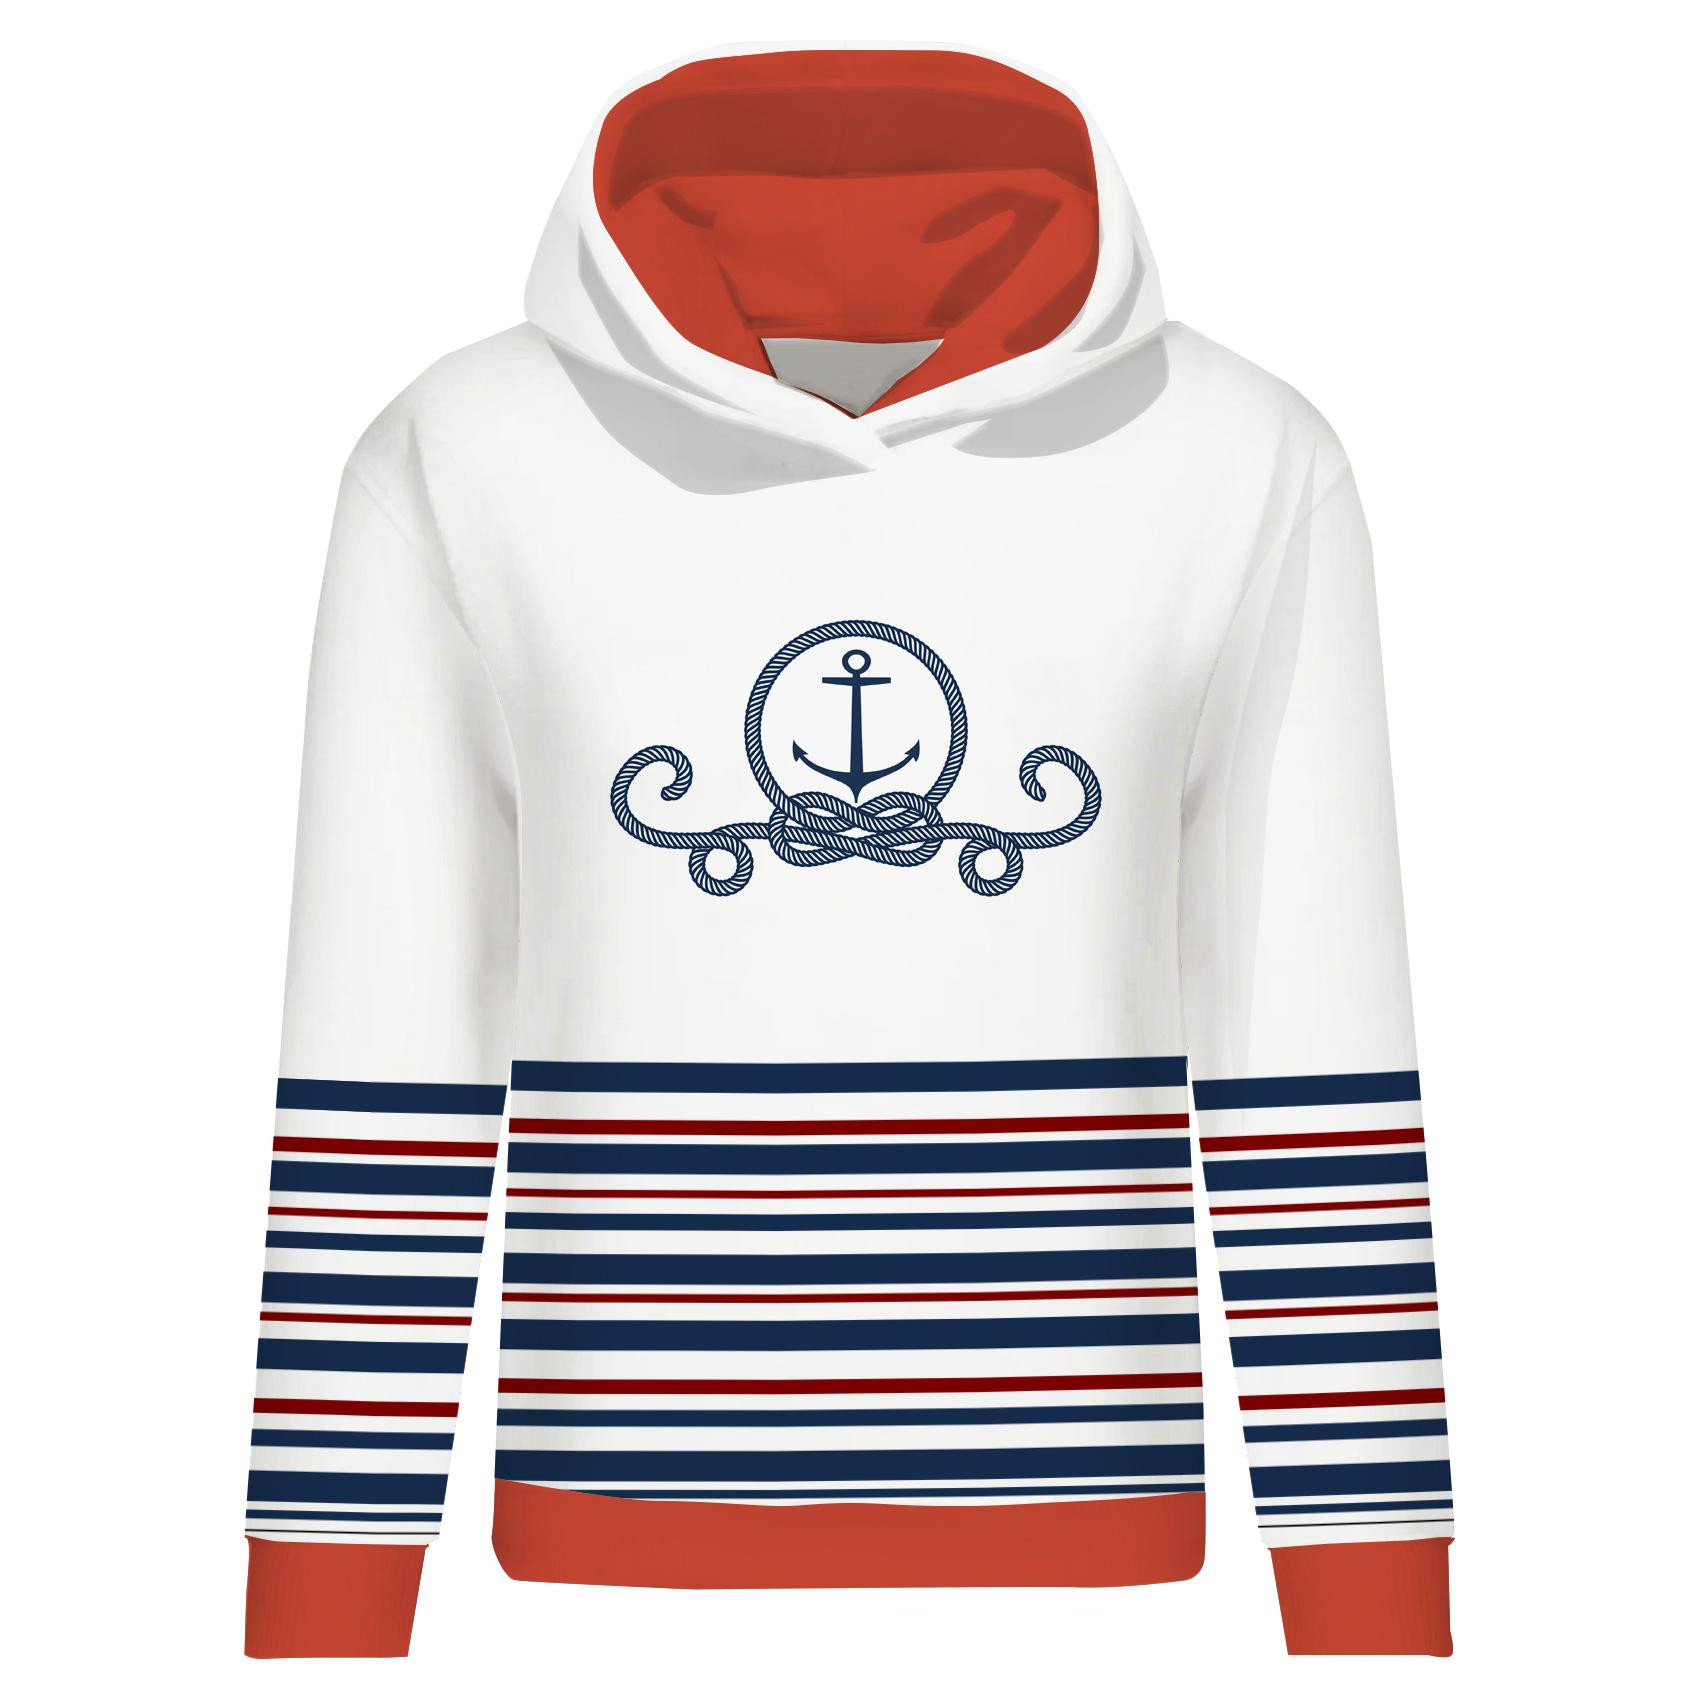 CLASSIC WOMEN’S HOODIE (POLA) - ANCHOR / stripes (marine) - looped knit fabric 